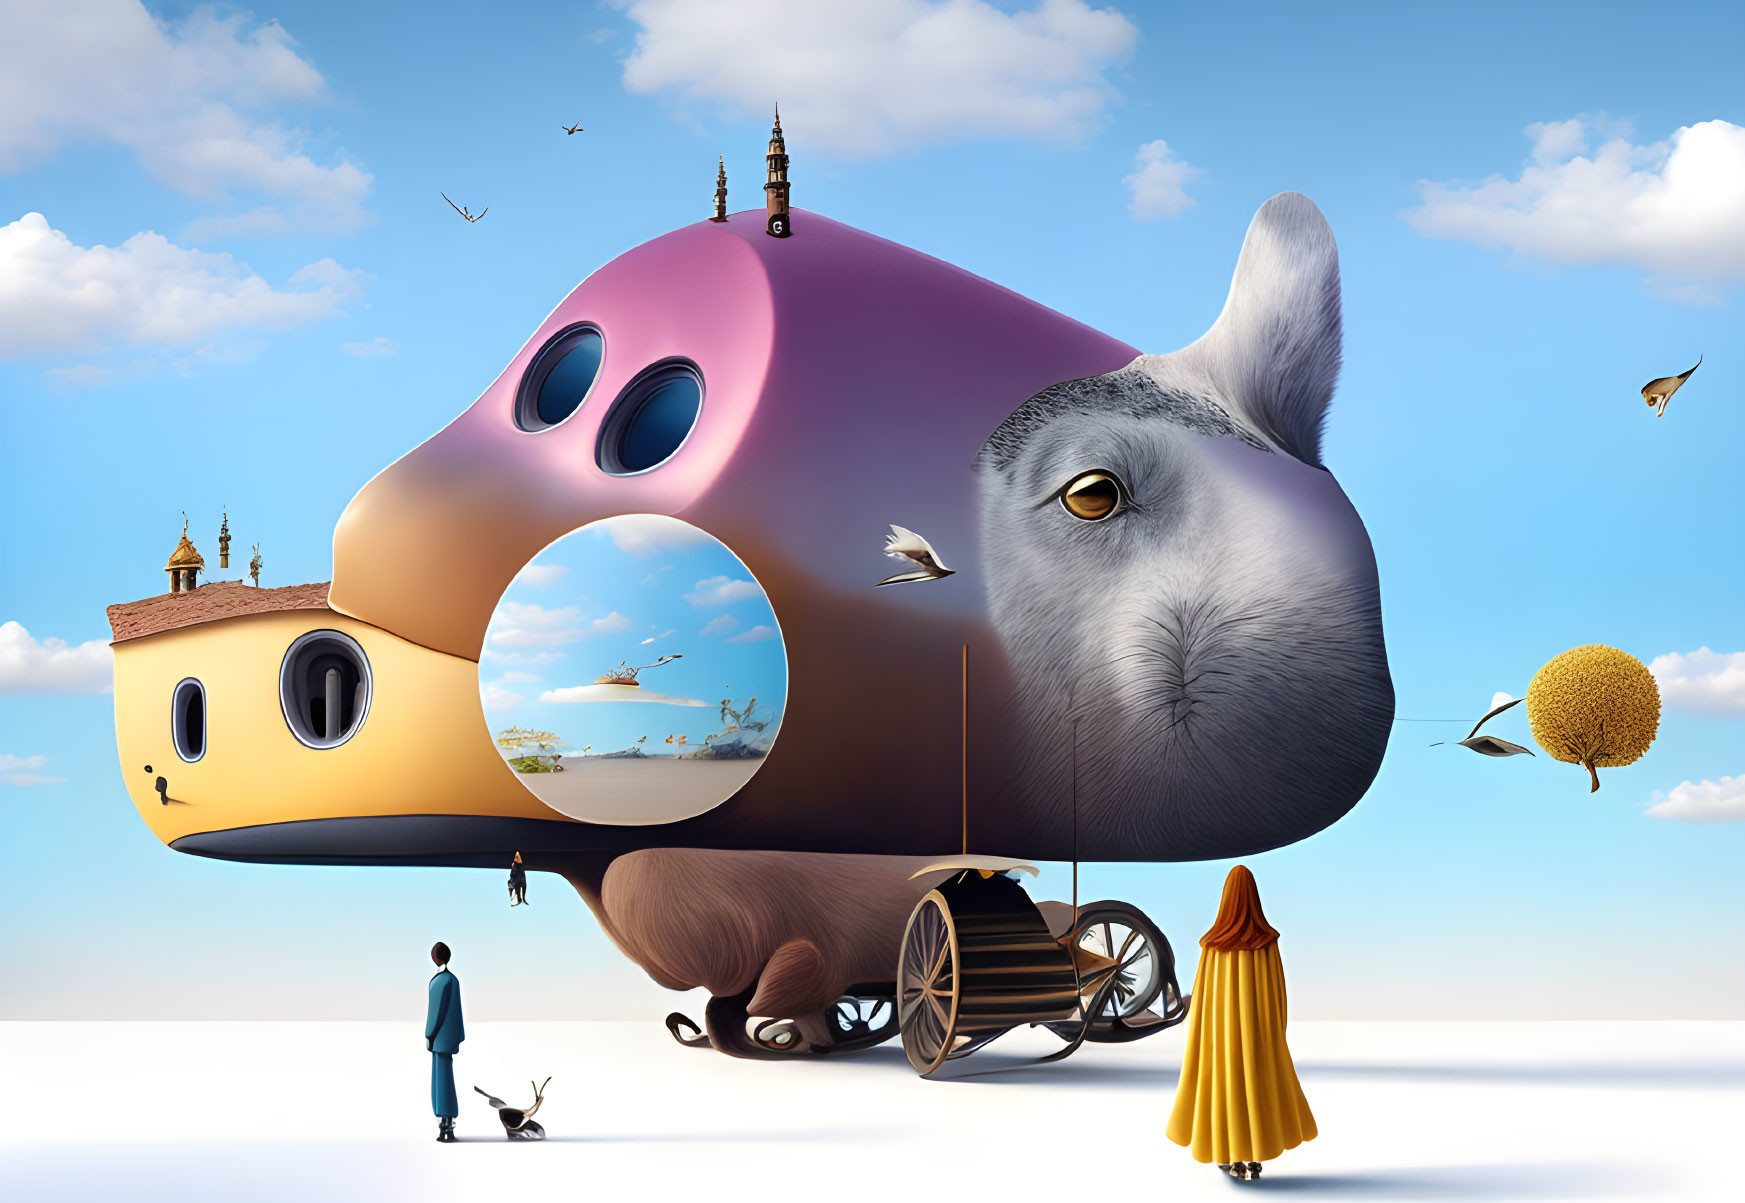 Whimsical rabbit-shaped structure with people, animals, and floating islands in a surreal scene